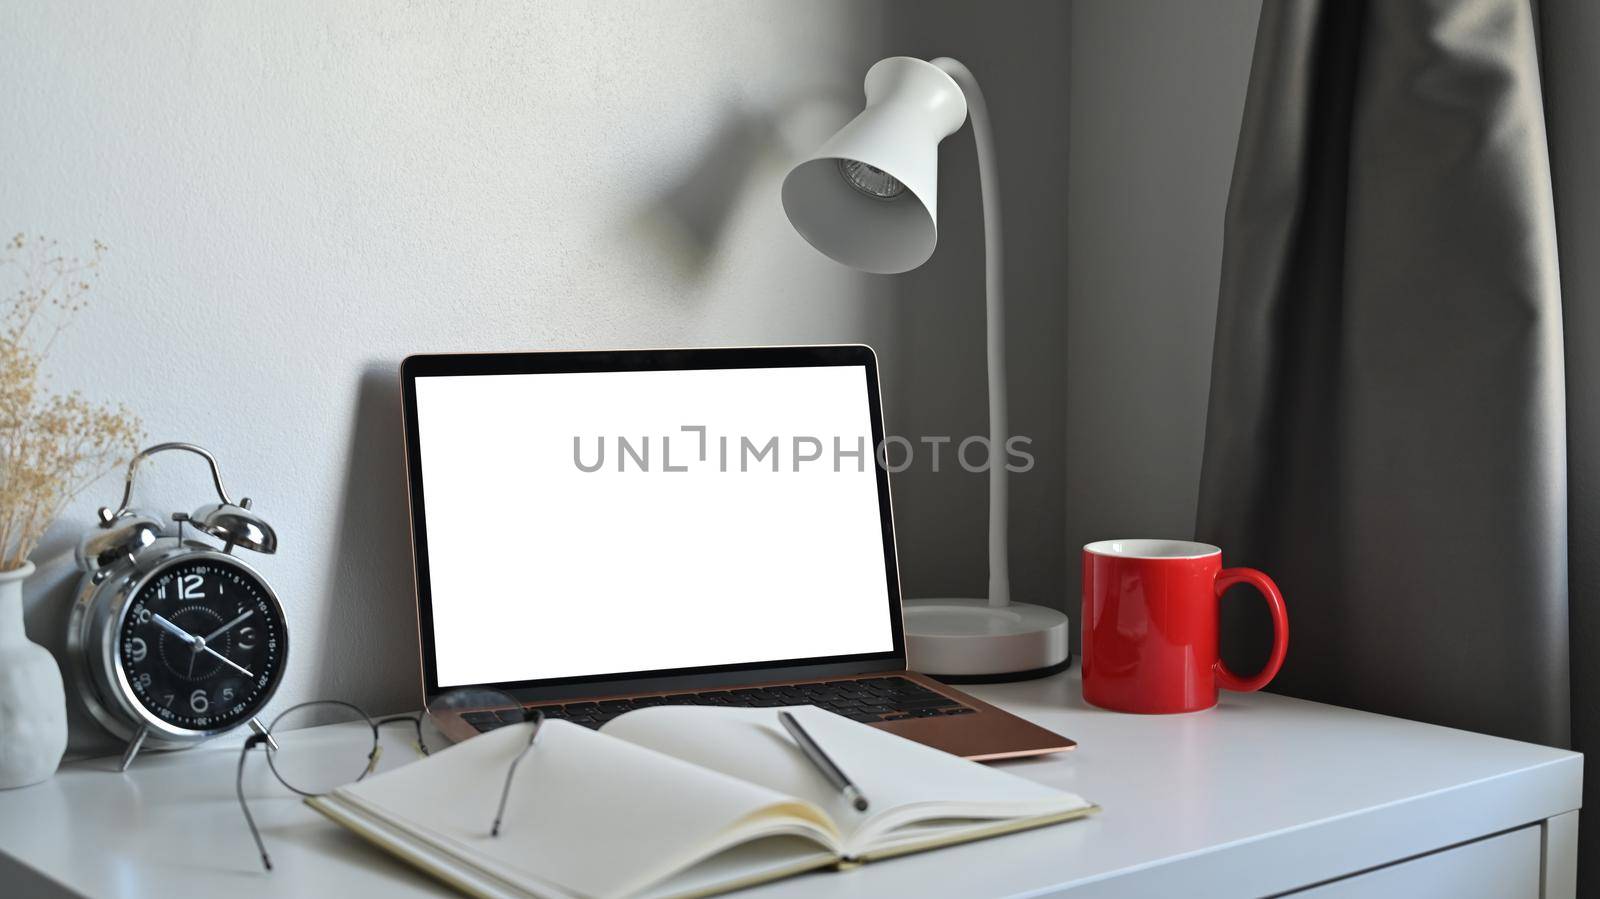 Computer laptop, notebook, coffee cup and lamp on white table. by prathanchorruangsak